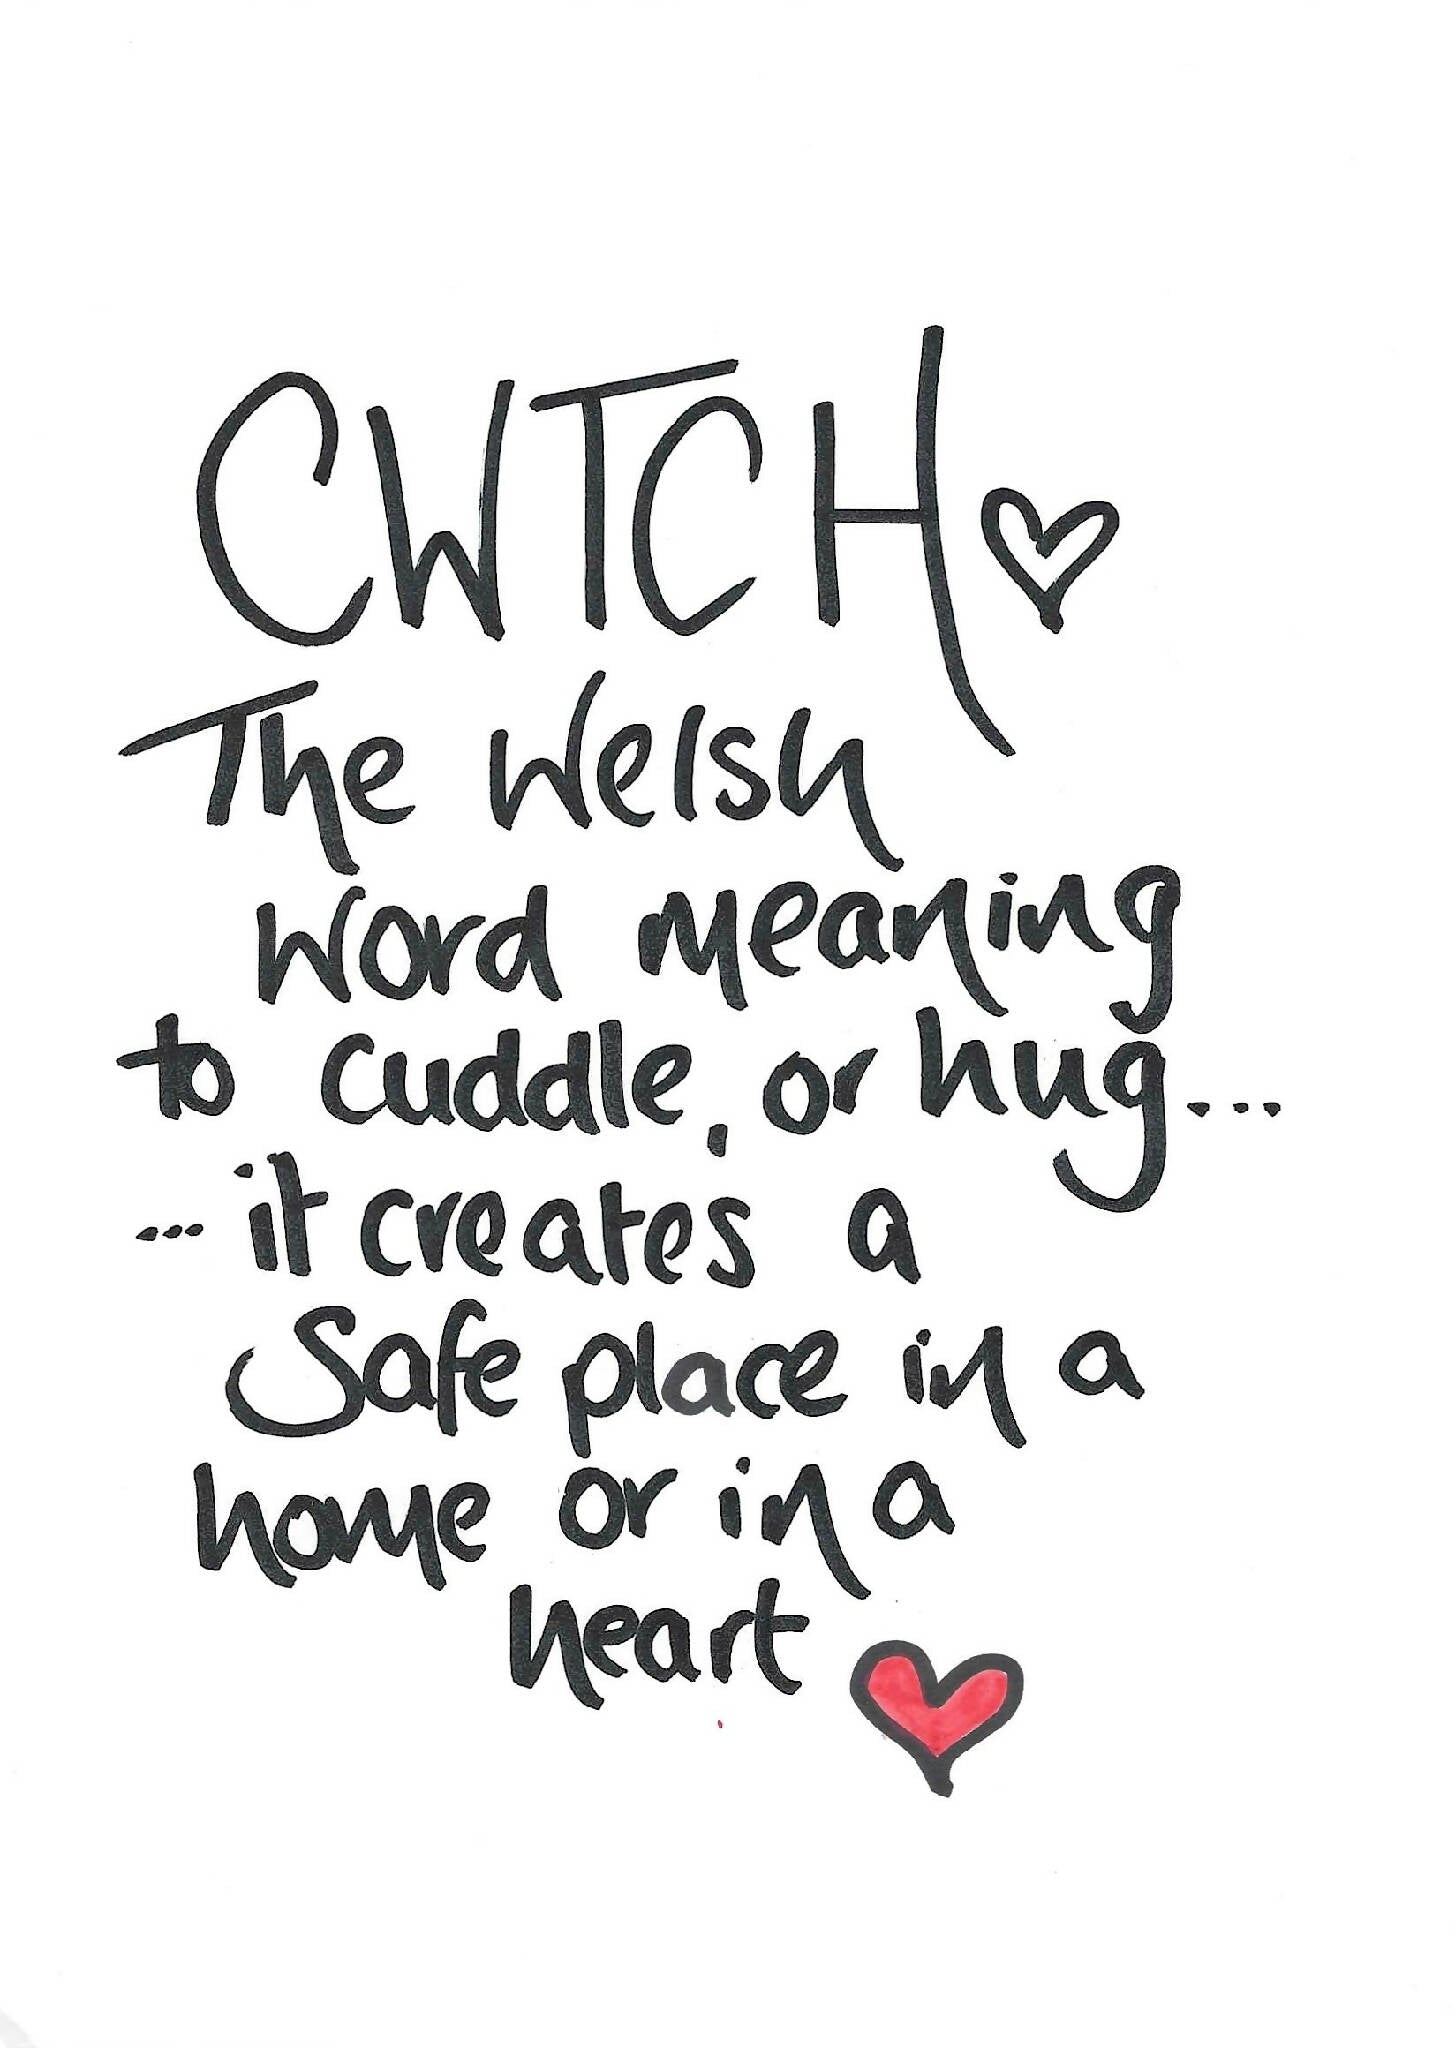 Cwtch handwritten A4 print, PRINT ONLY no frame or mount.